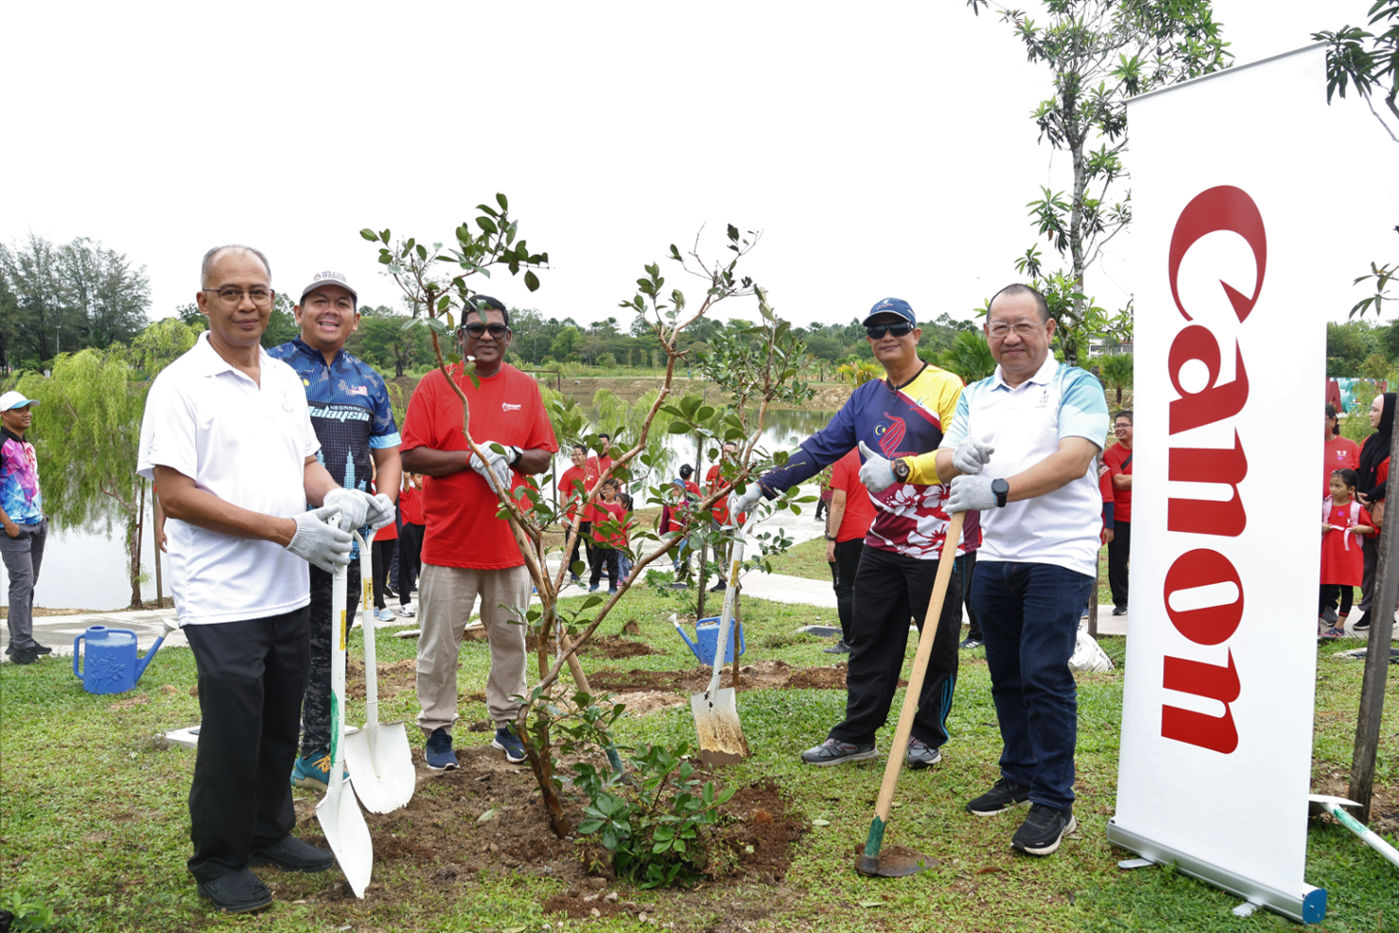 Canon's Environmental Stewardship Continues with 200 Trees in Kuantan